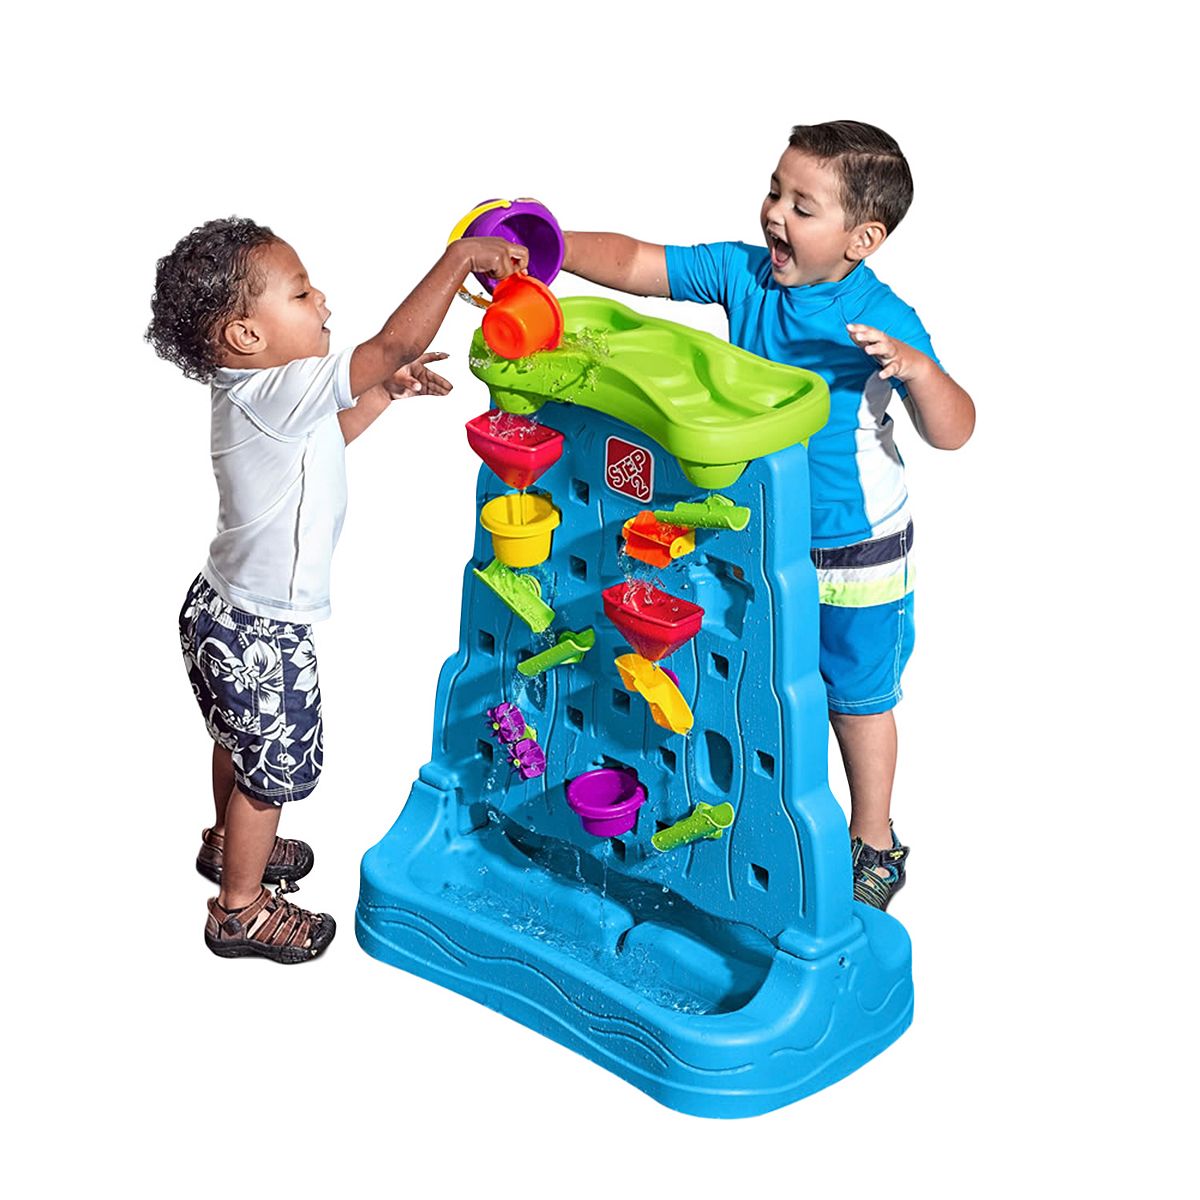 13-Piece Step2 Waterfall Discovery Wall Double-Sided Outdoor Water Play Set $48.88 + free shipping